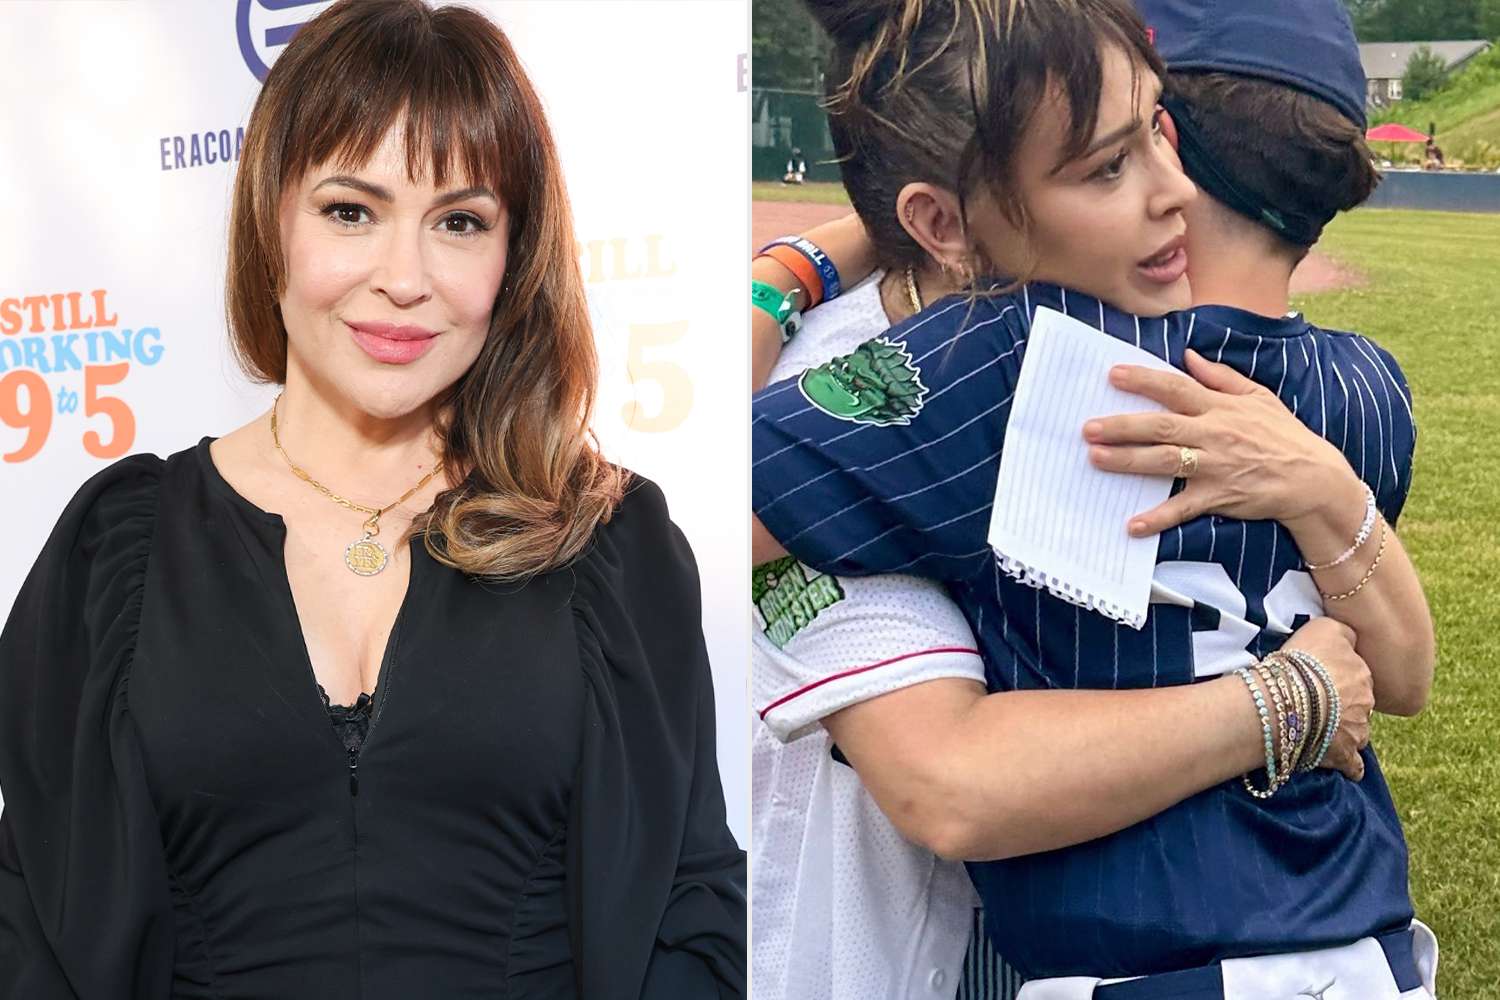 Alyssa Milano Says Son’s Baseball Team 'Came in 3rd Out of 70 Teams’ After She Received Criticism for Fundraising for Them